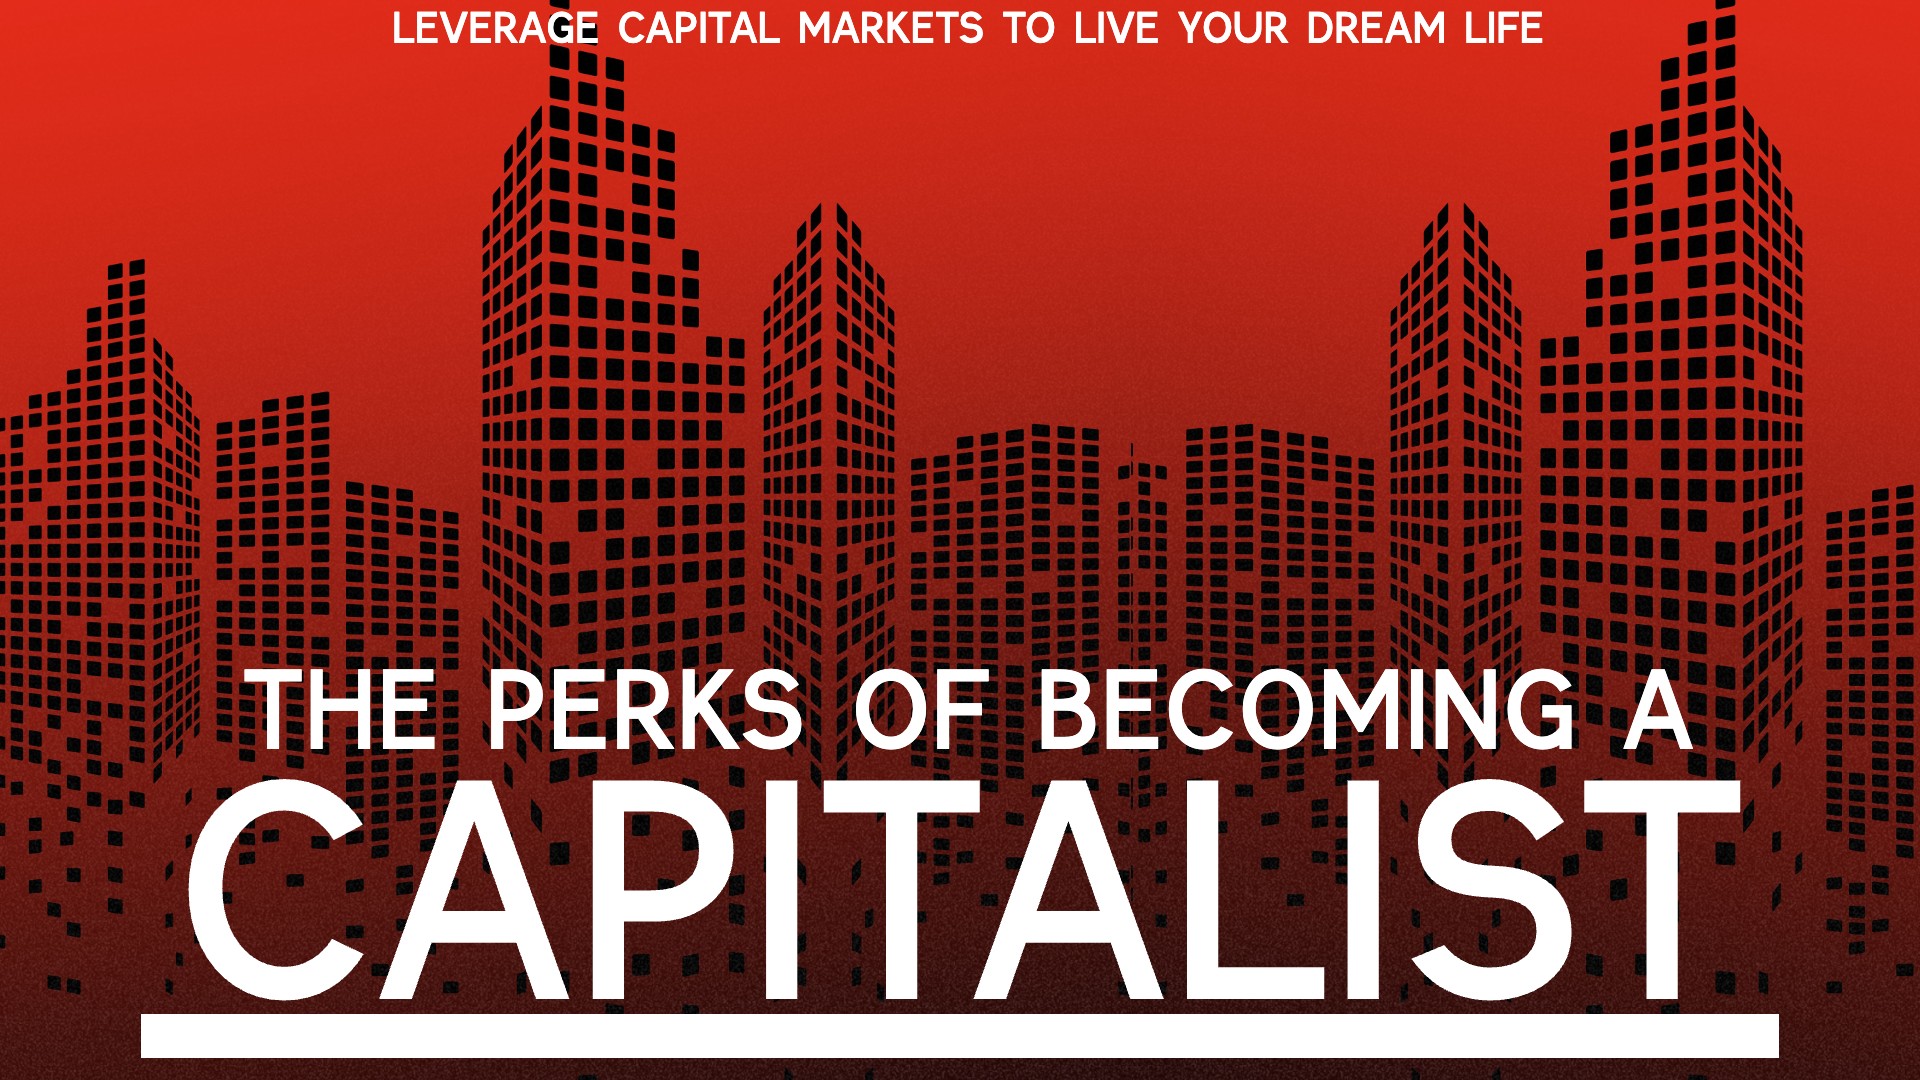 The Perks of Becoming a Capitalist